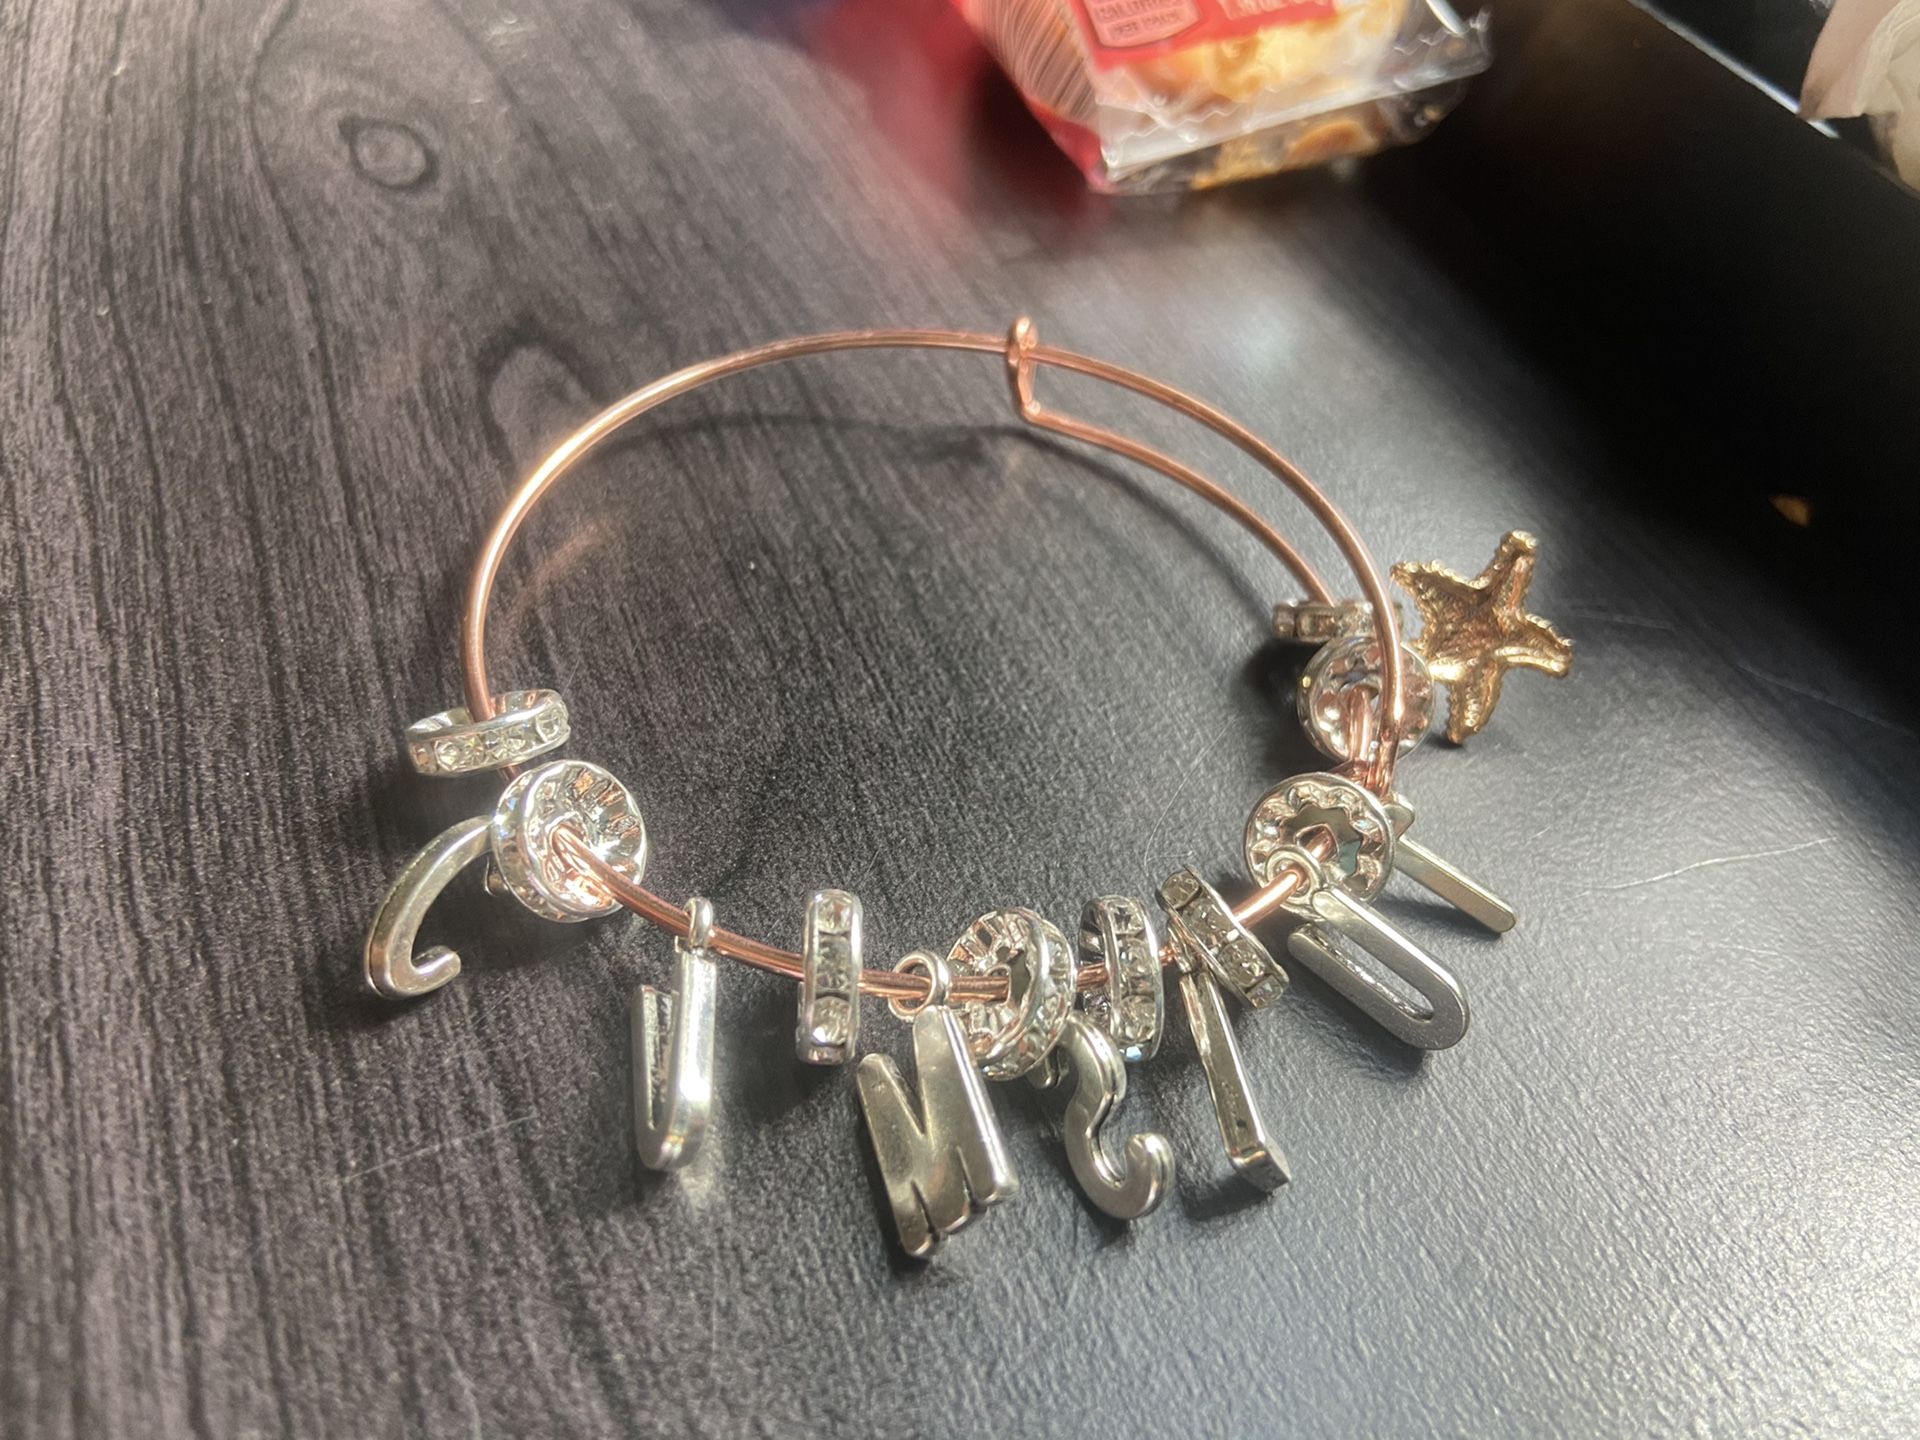 H.O.E Charms for sale! High quality Charm bracelets for your Hot Girl summer now available in 10 + different styles